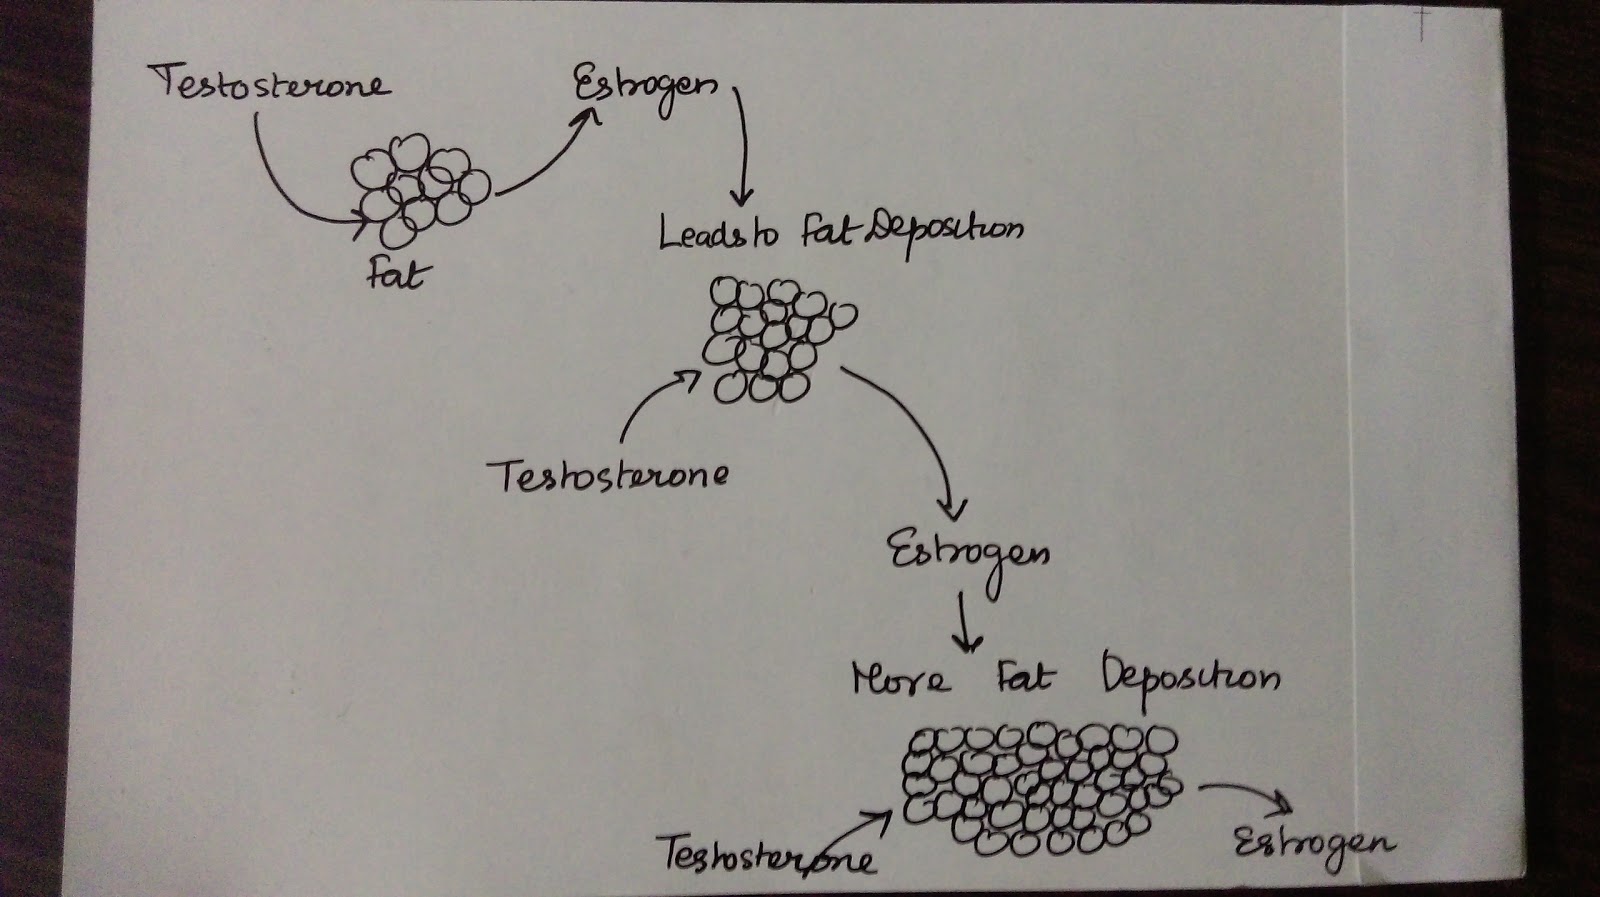 Testosterone Decreases in High Carbohydrate Diet